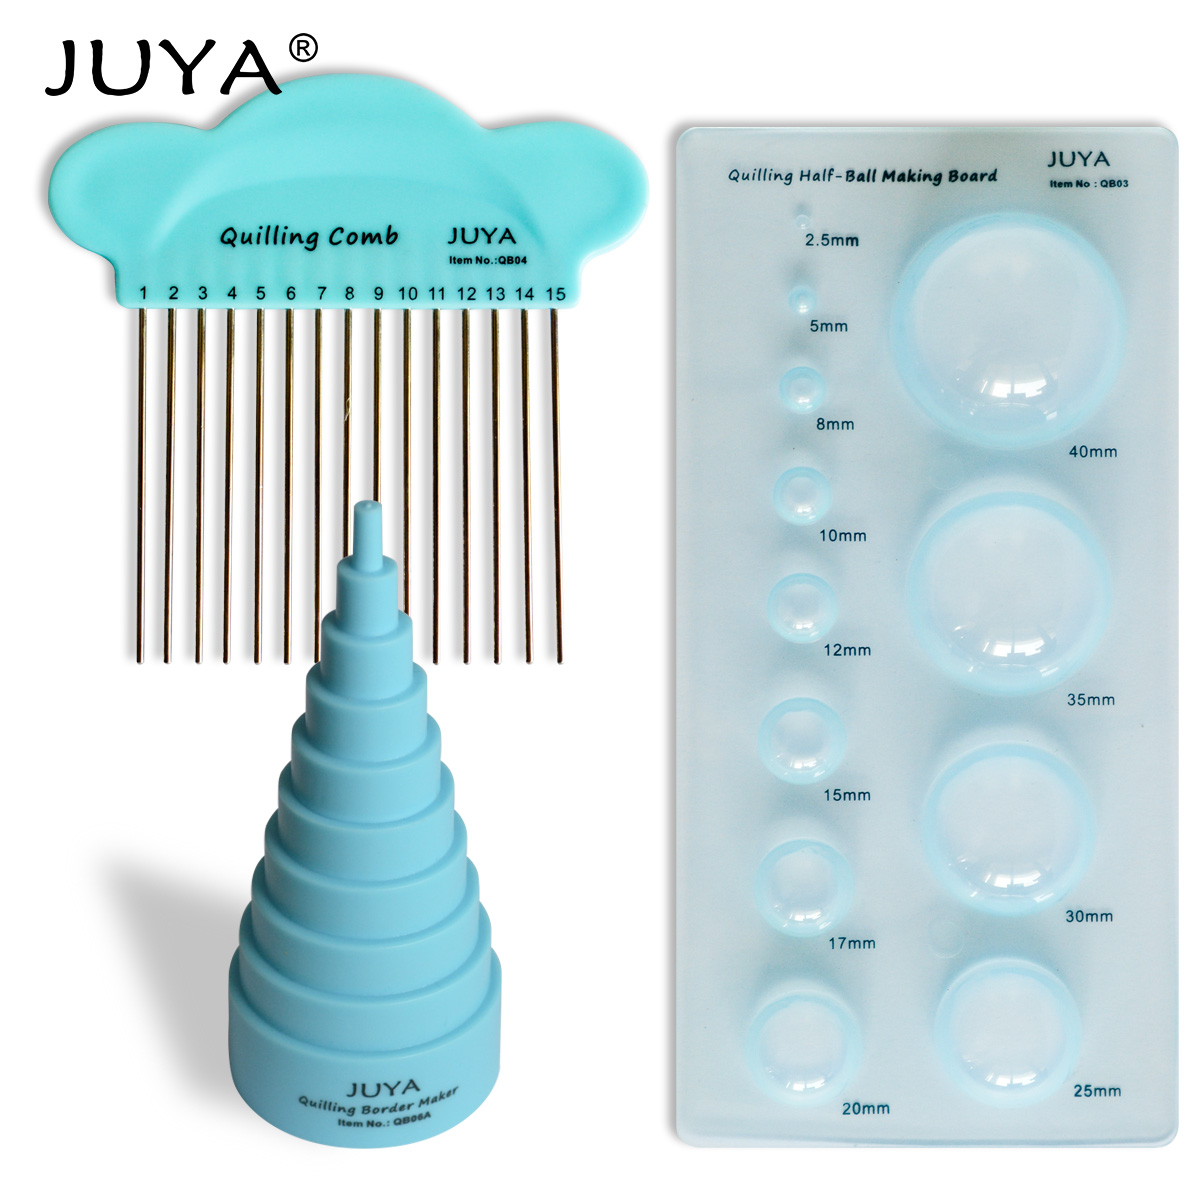 JUYA Drawing rules kit for quilling Round Mould and 3D Maker quilling tools